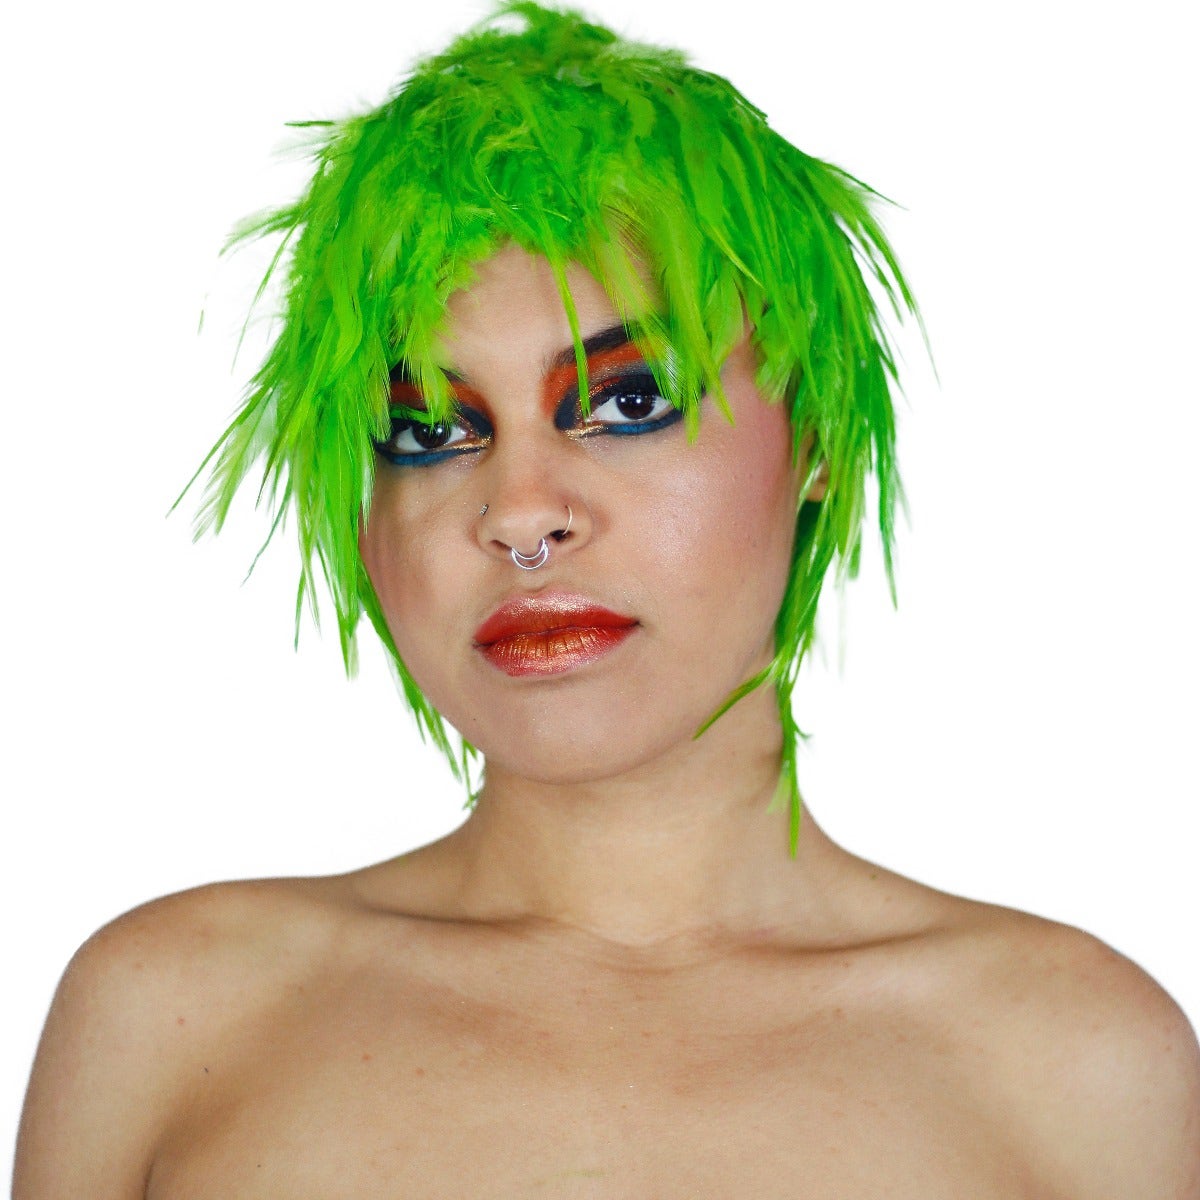 Hackle Feather Wig-Solid - Lime